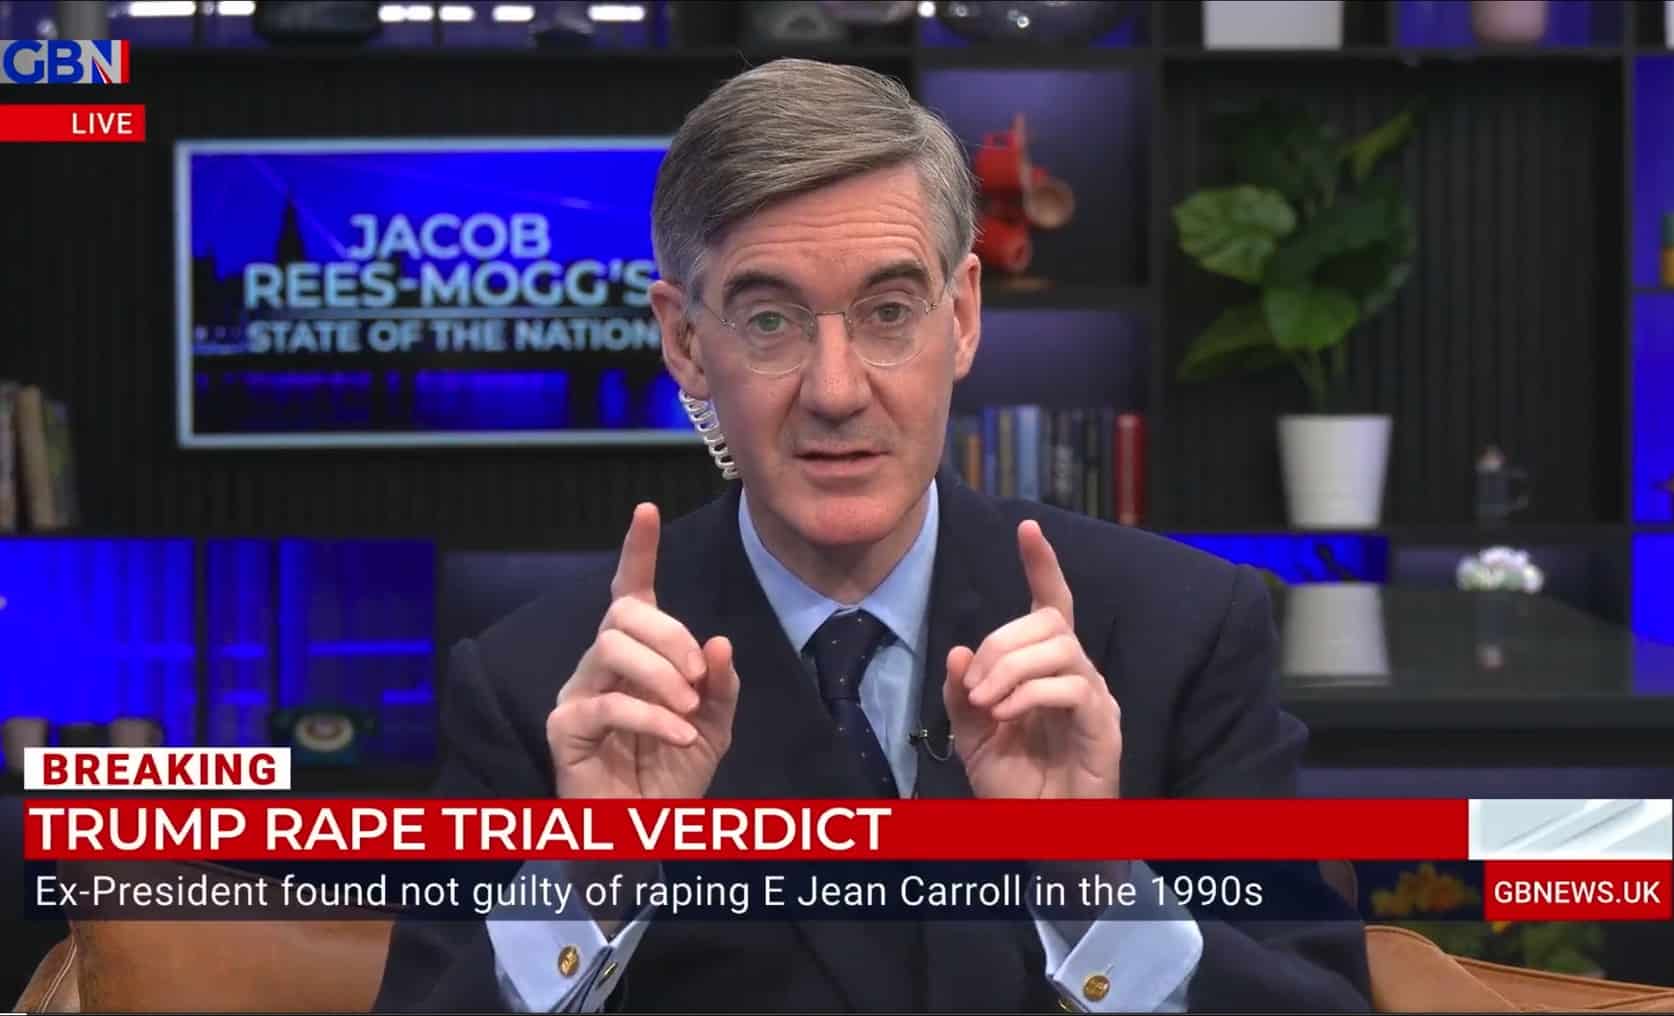 Shameless Rees-Mogg reveals Trump’s ‘not guilty’ verdict and questions US legal system